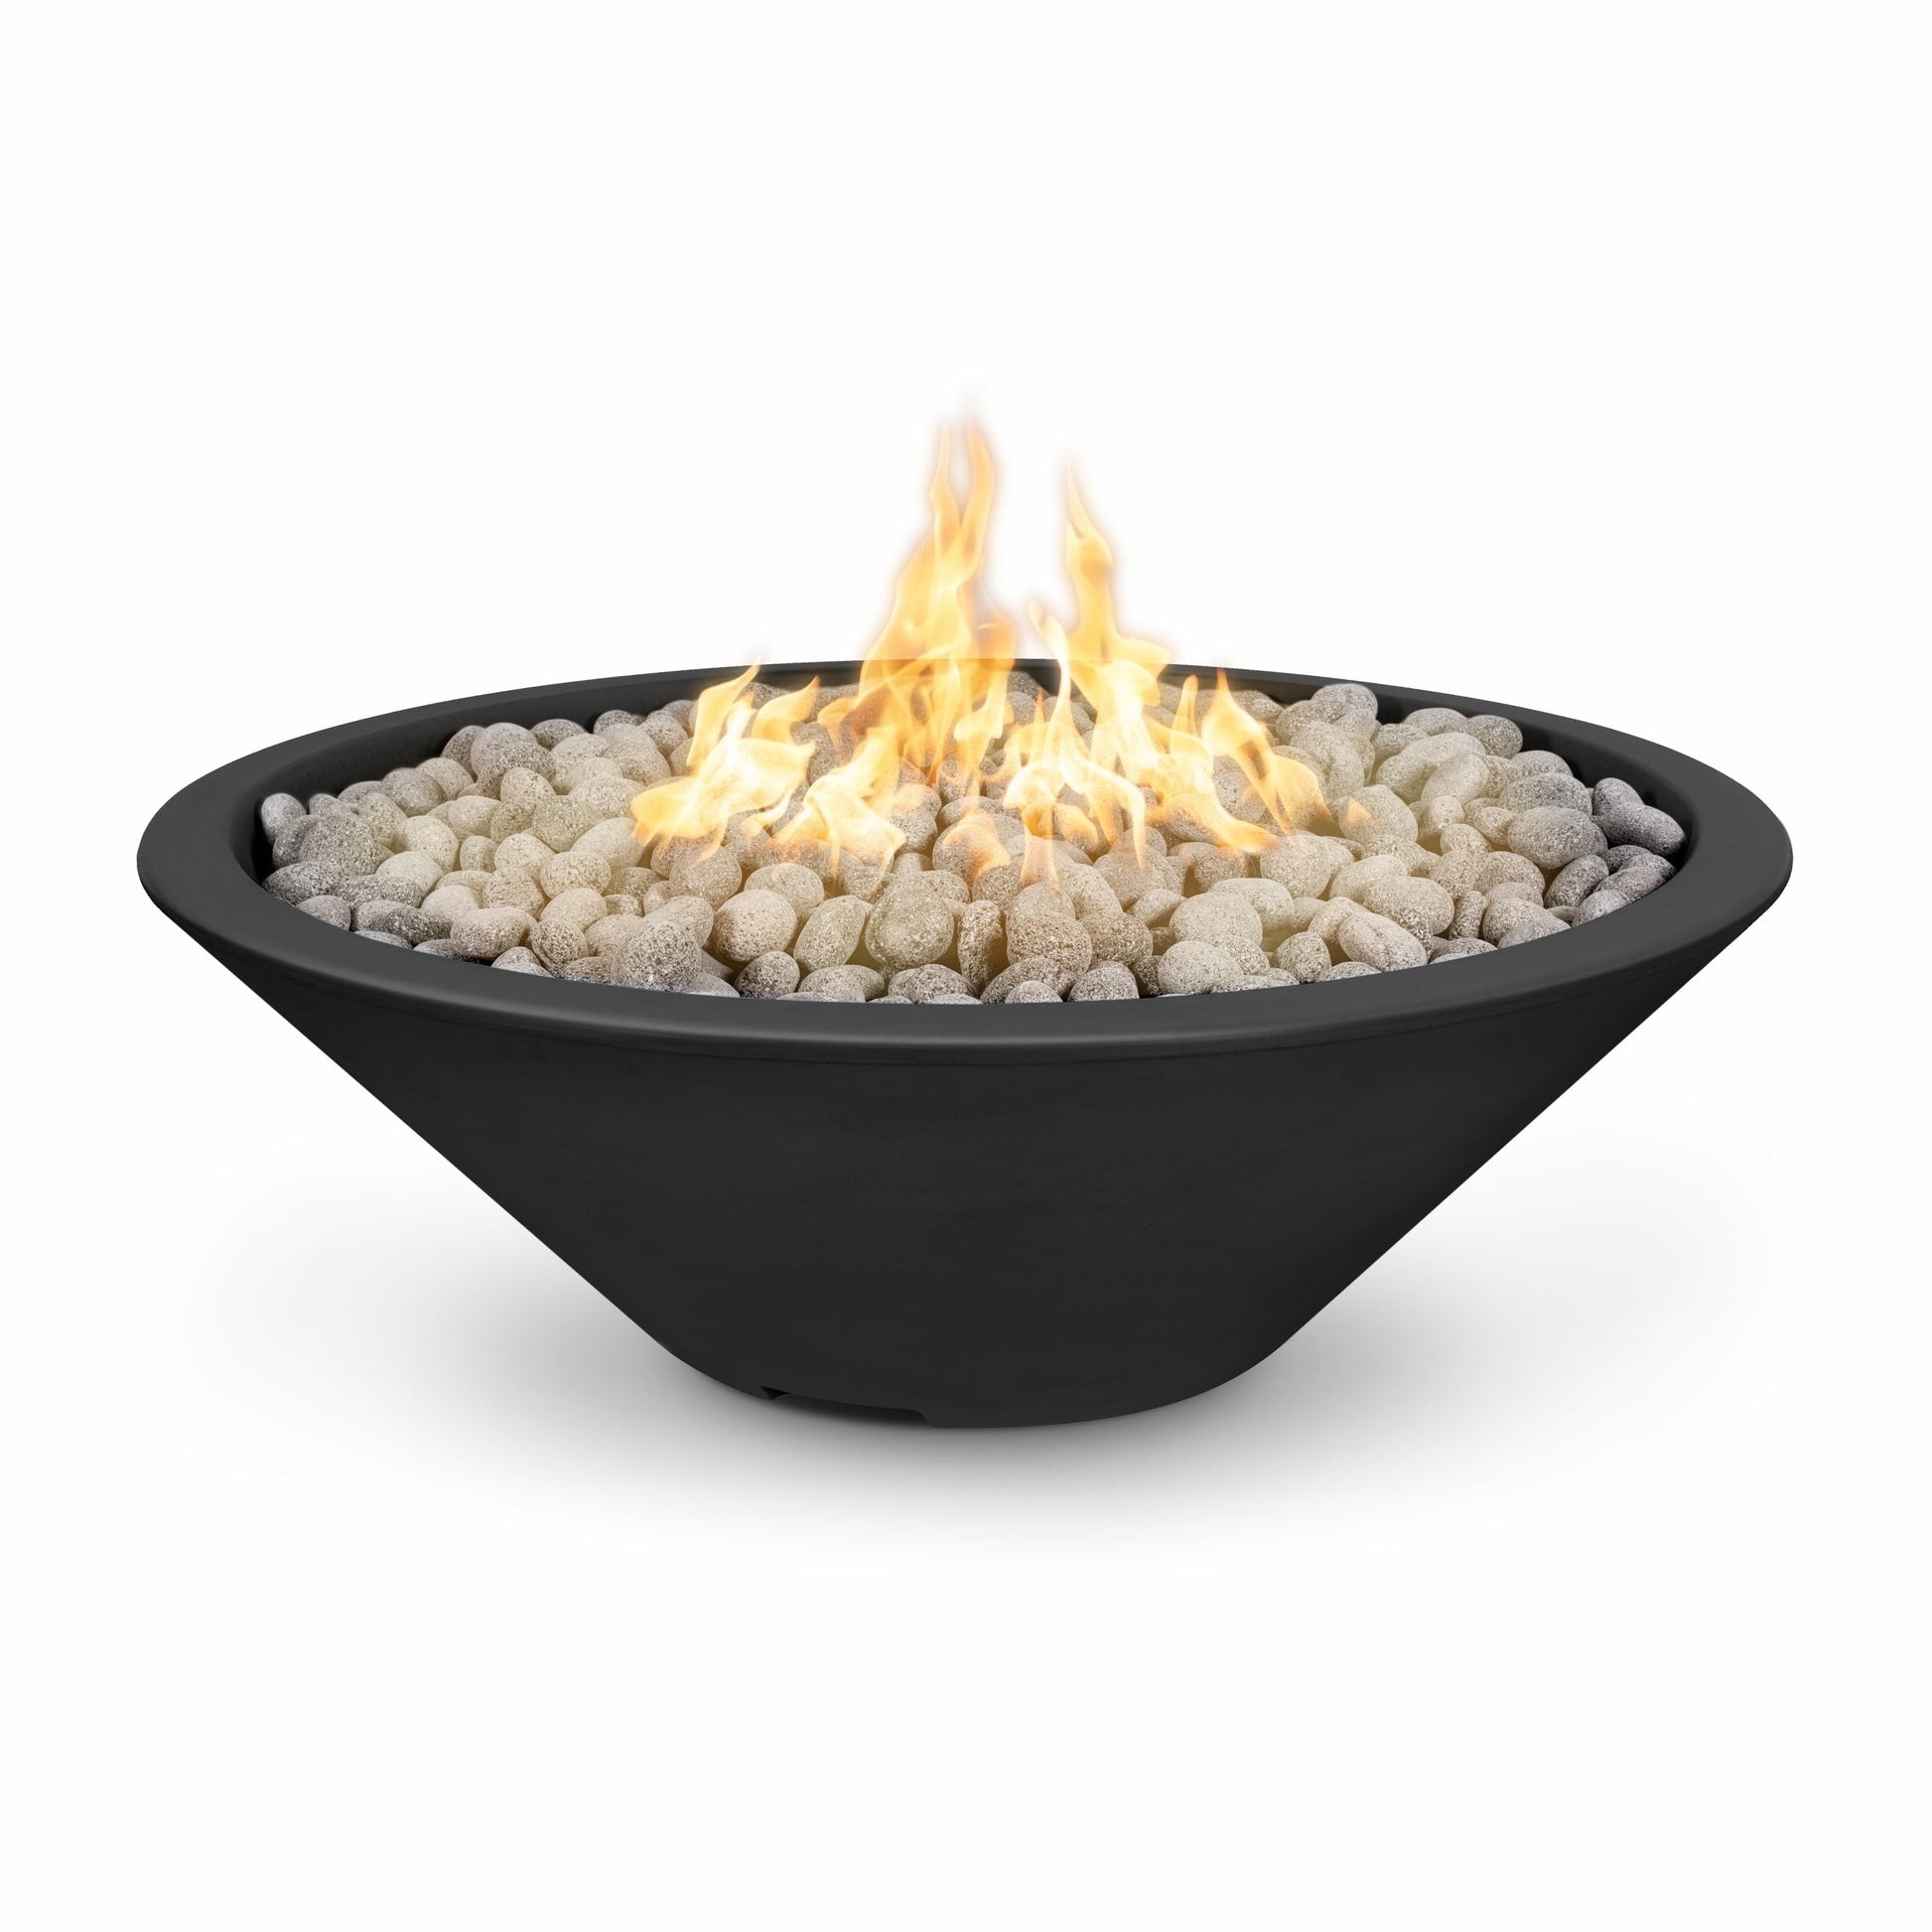 The Outdoor Plus Round Cazo 60" Java Powder Coated Metal Natural Gas Fire Pit with Match Lit Ignition